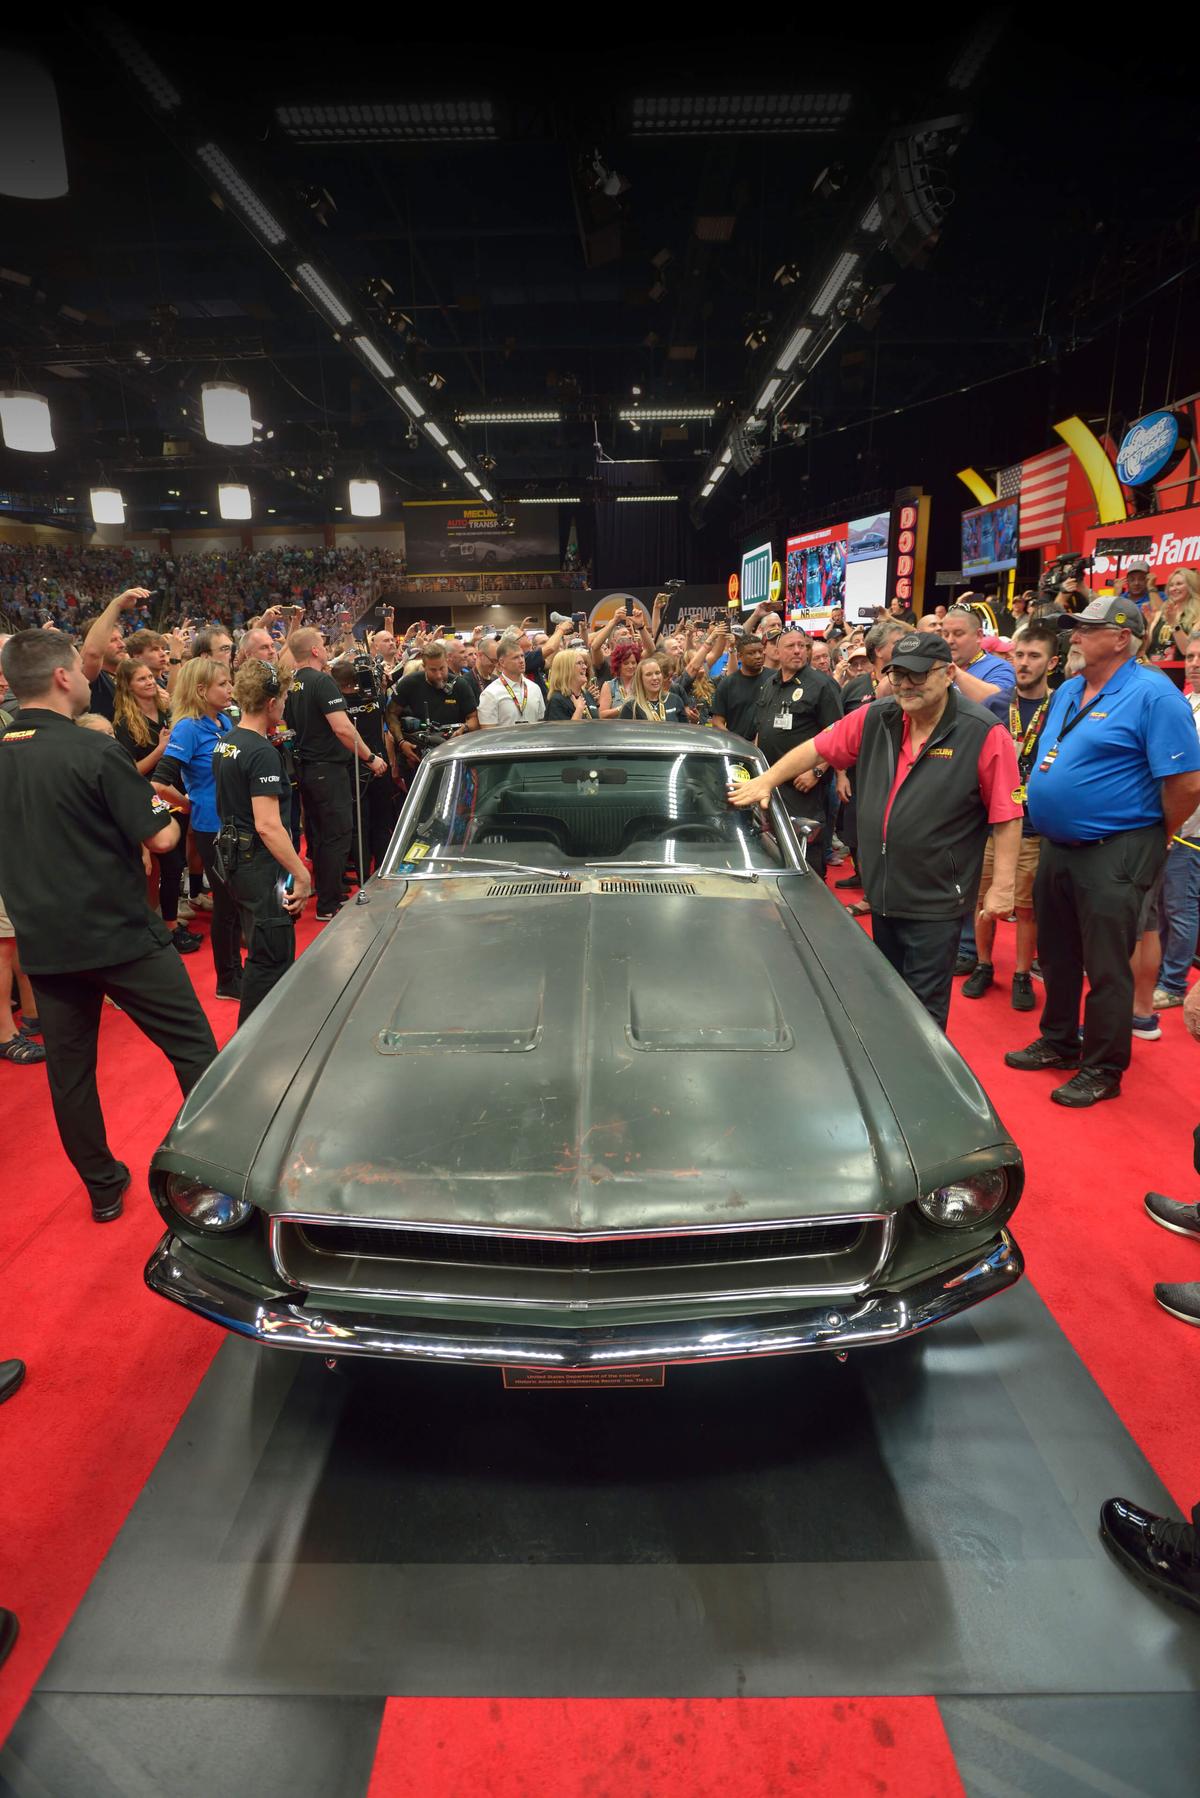 Auto auctions are an exciting, lively way to purchase collectible cars. But when the hammer goes down, you just bought it "as is," so be careful before raising your hand. (Courtesy of Mecum Auctions)